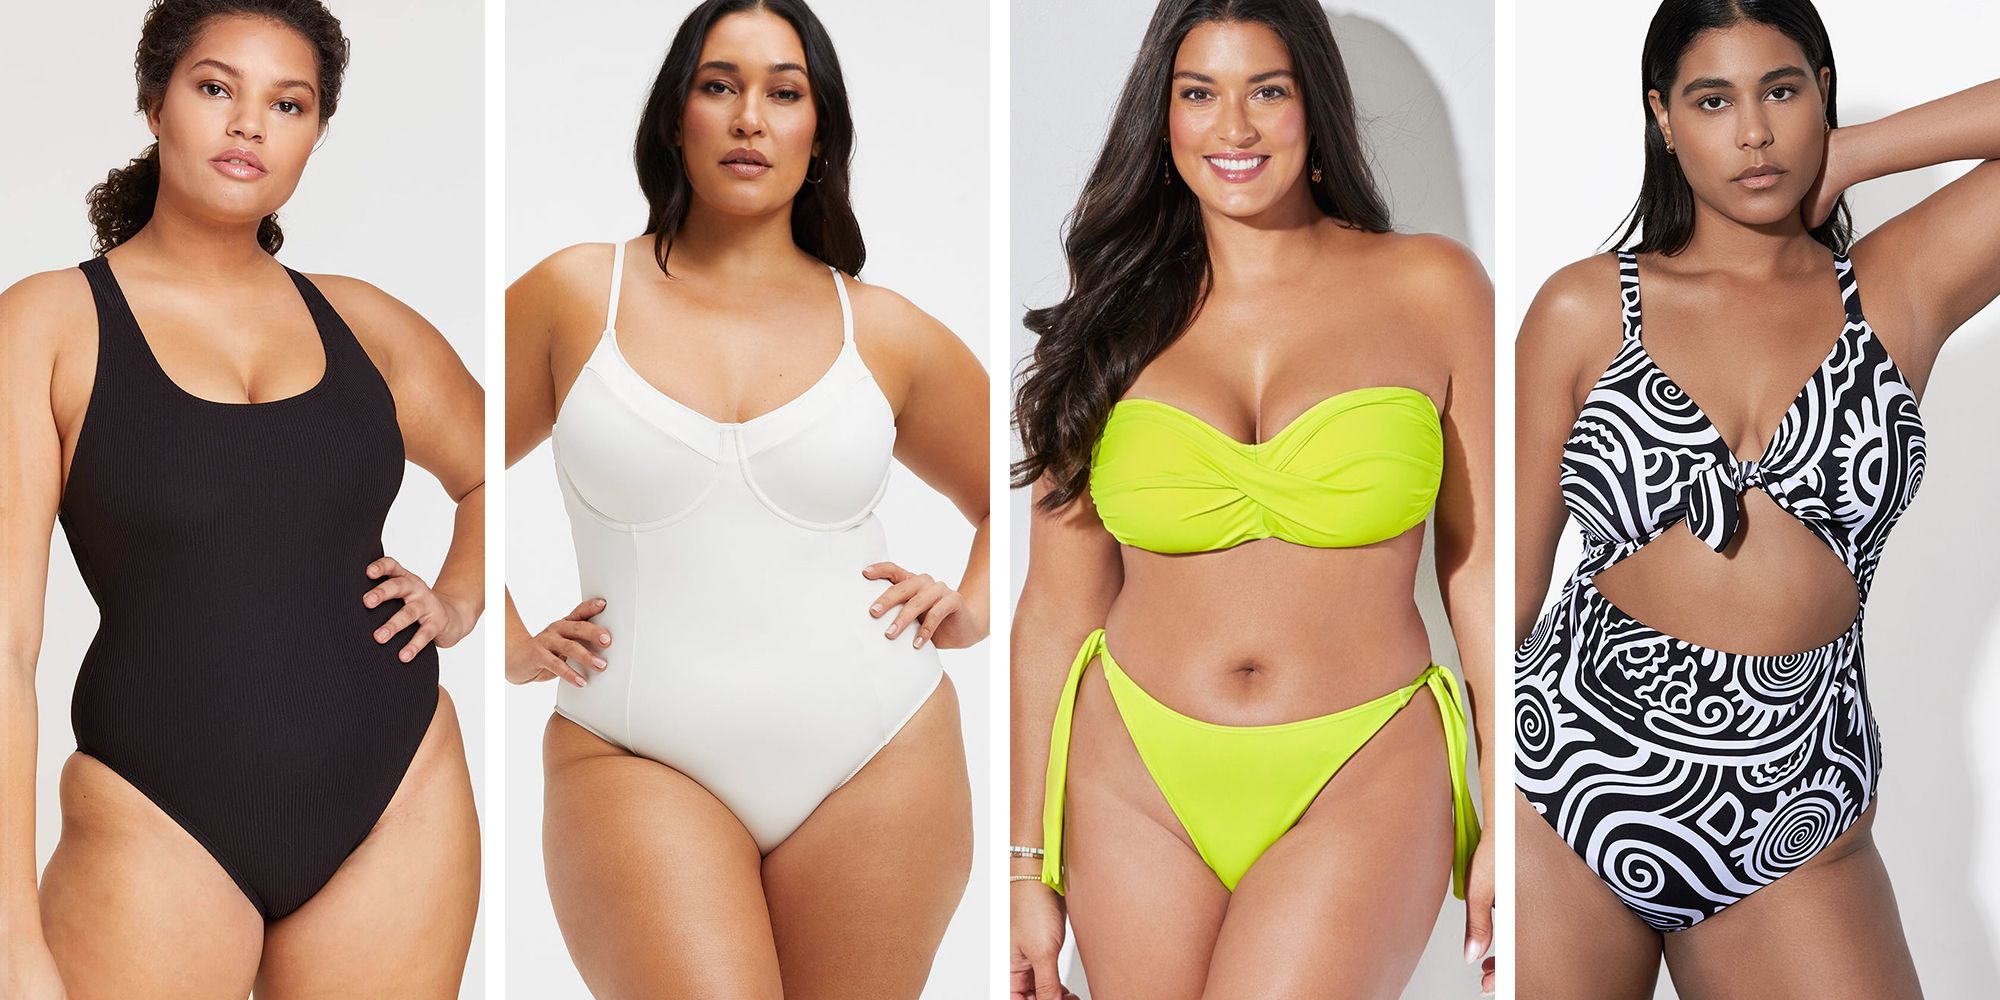 Best plus size swimwear: Top bathing suits and bikinis for curves